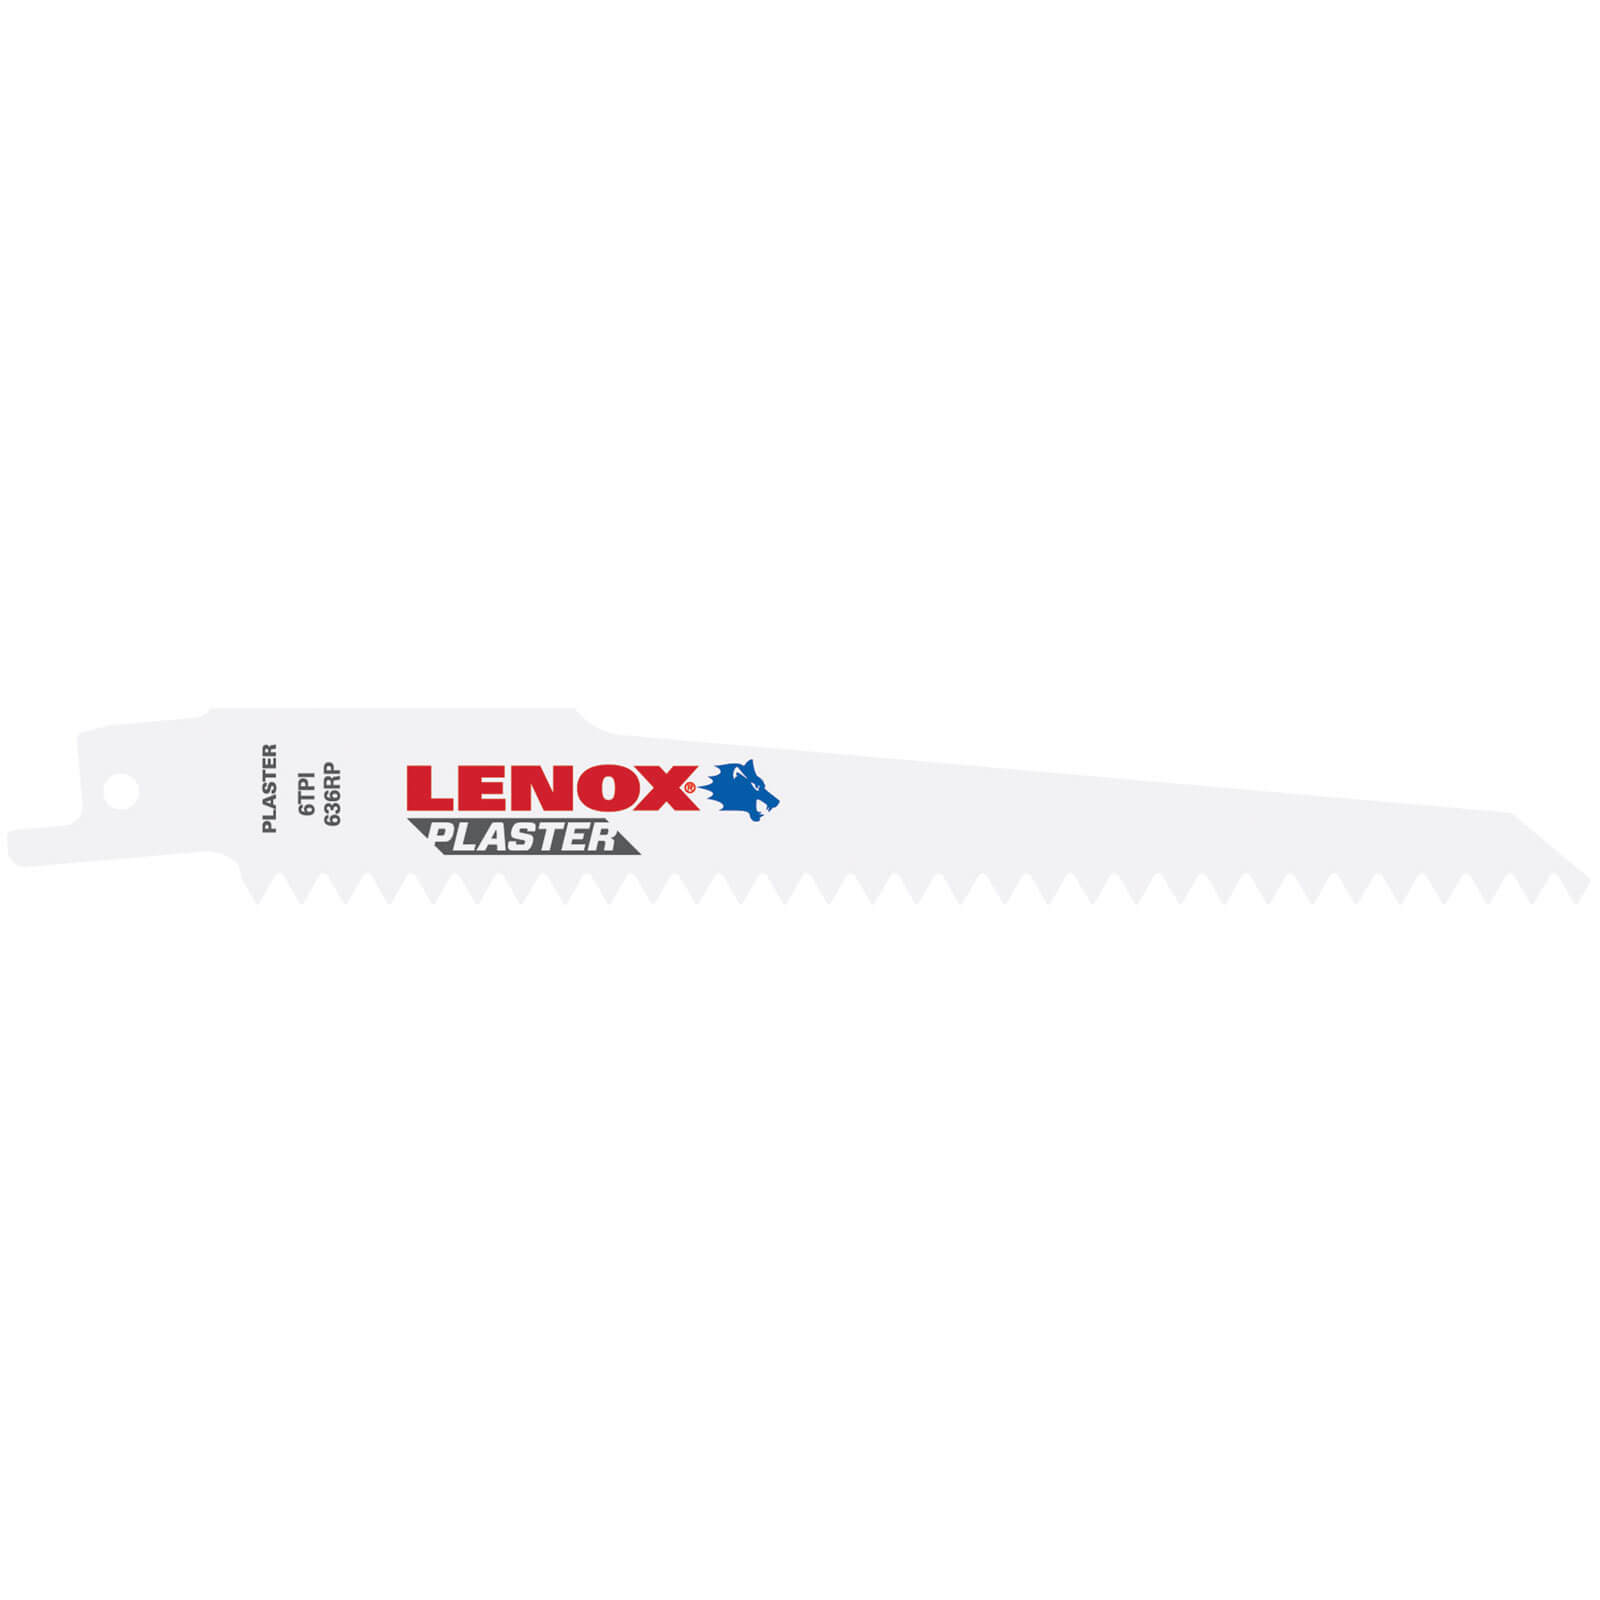 Image of Lenox 6TPI Plaster Cutting Reciprocating Sabre Saw Blades 152mm Pack of 5